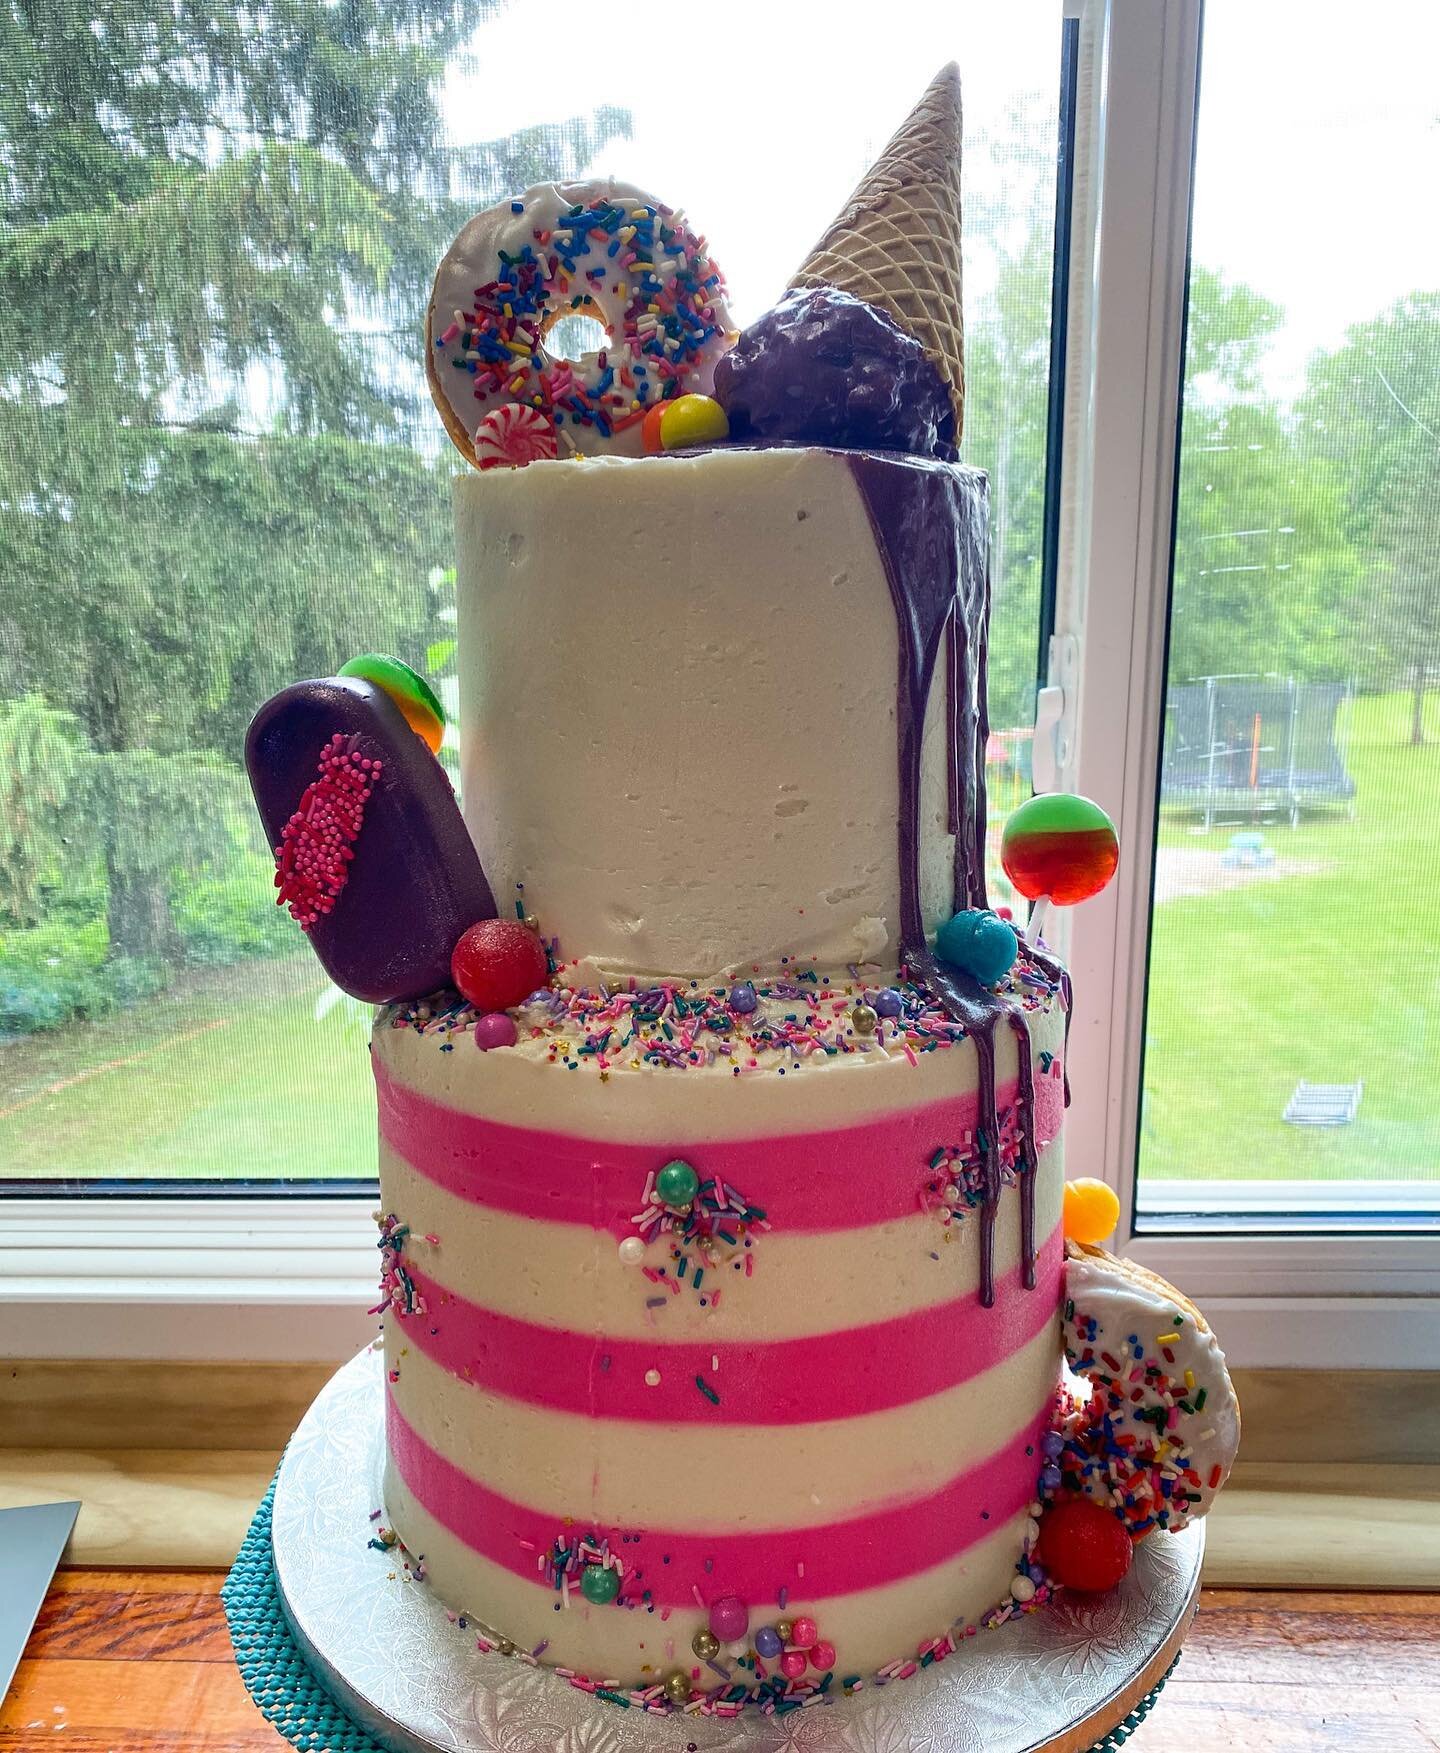 When your little girl says she wants candy, doughnuts, lollipops, and ice cream on your birthday cake you make it 🍦🎂🍭🍩🍬 And after hours spent creating her cake she decides she wants an unicorn kitty cake 🤦🏼&zwj;♀️ oh well maybe next year 🤷🏼&